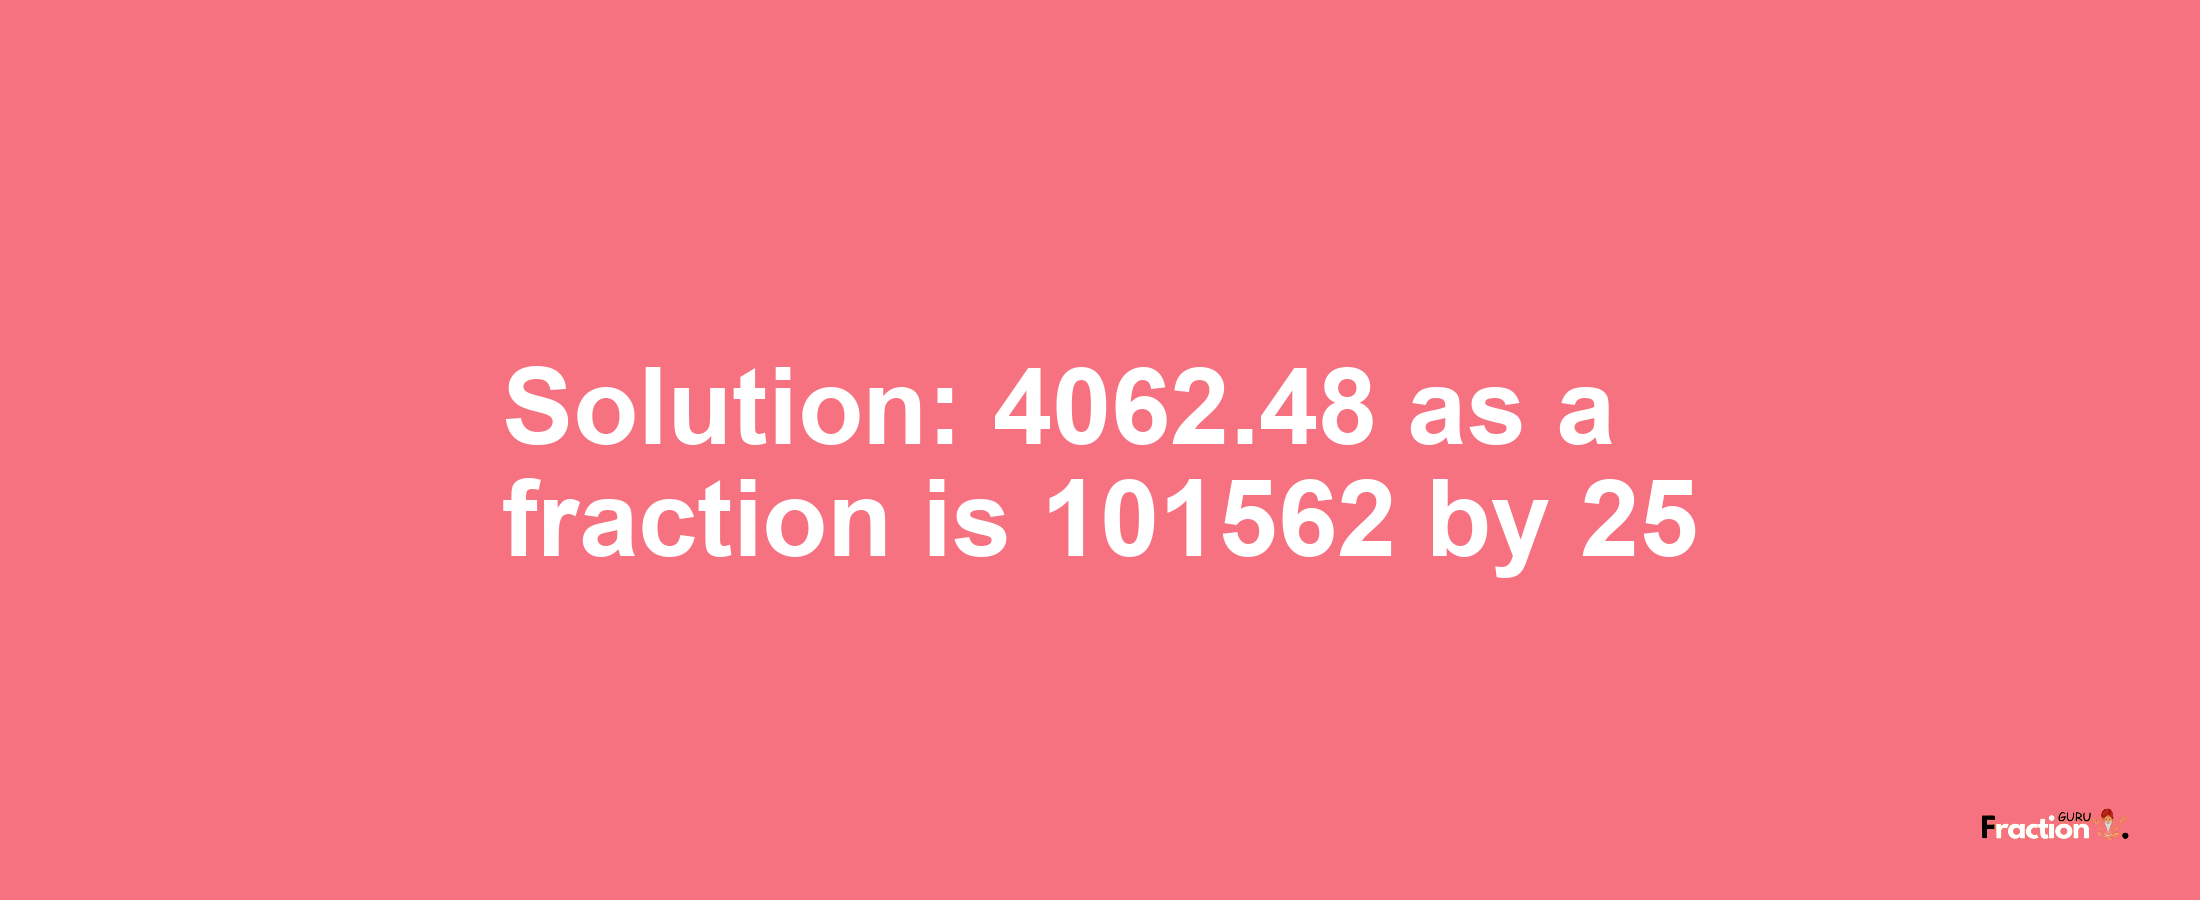 Solution:4062.48 as a fraction is 101562/25